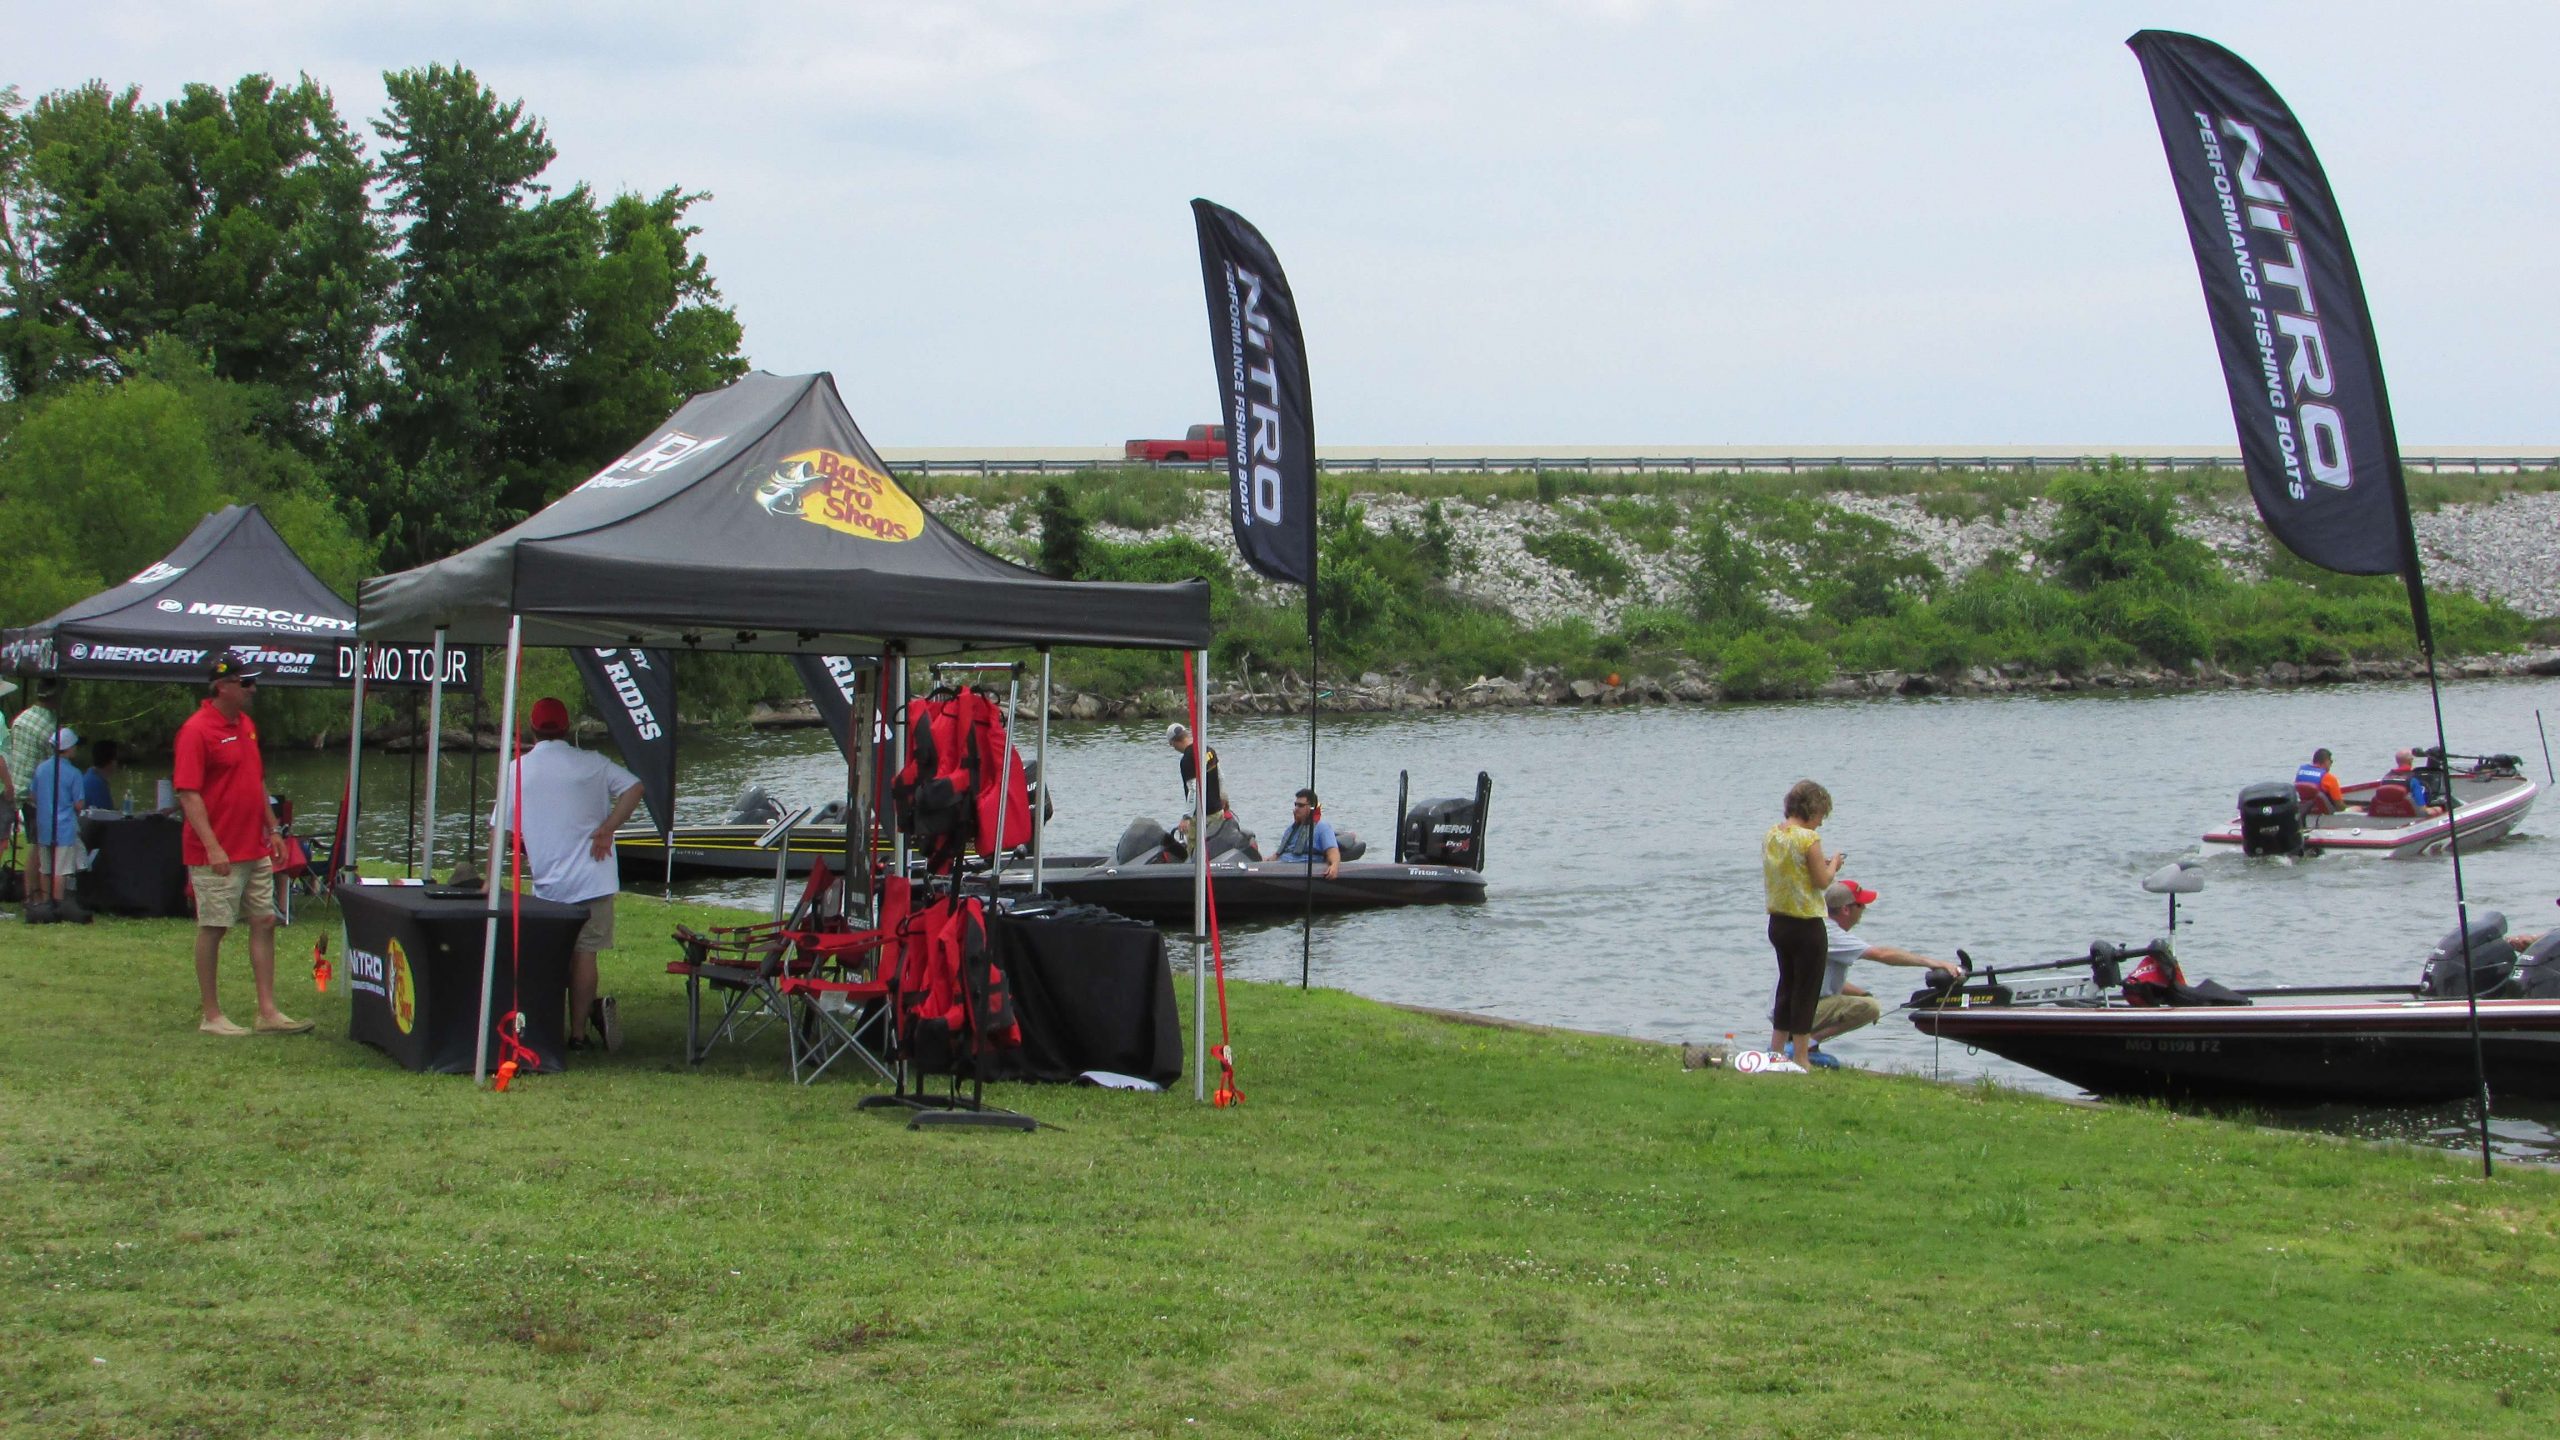 Demo rides from multiple bass boat companies were offered on the BASSfest fishery, Kentucky Lake, as well. All in all, if it involved bass fishing, BASSfest 2015 had it.